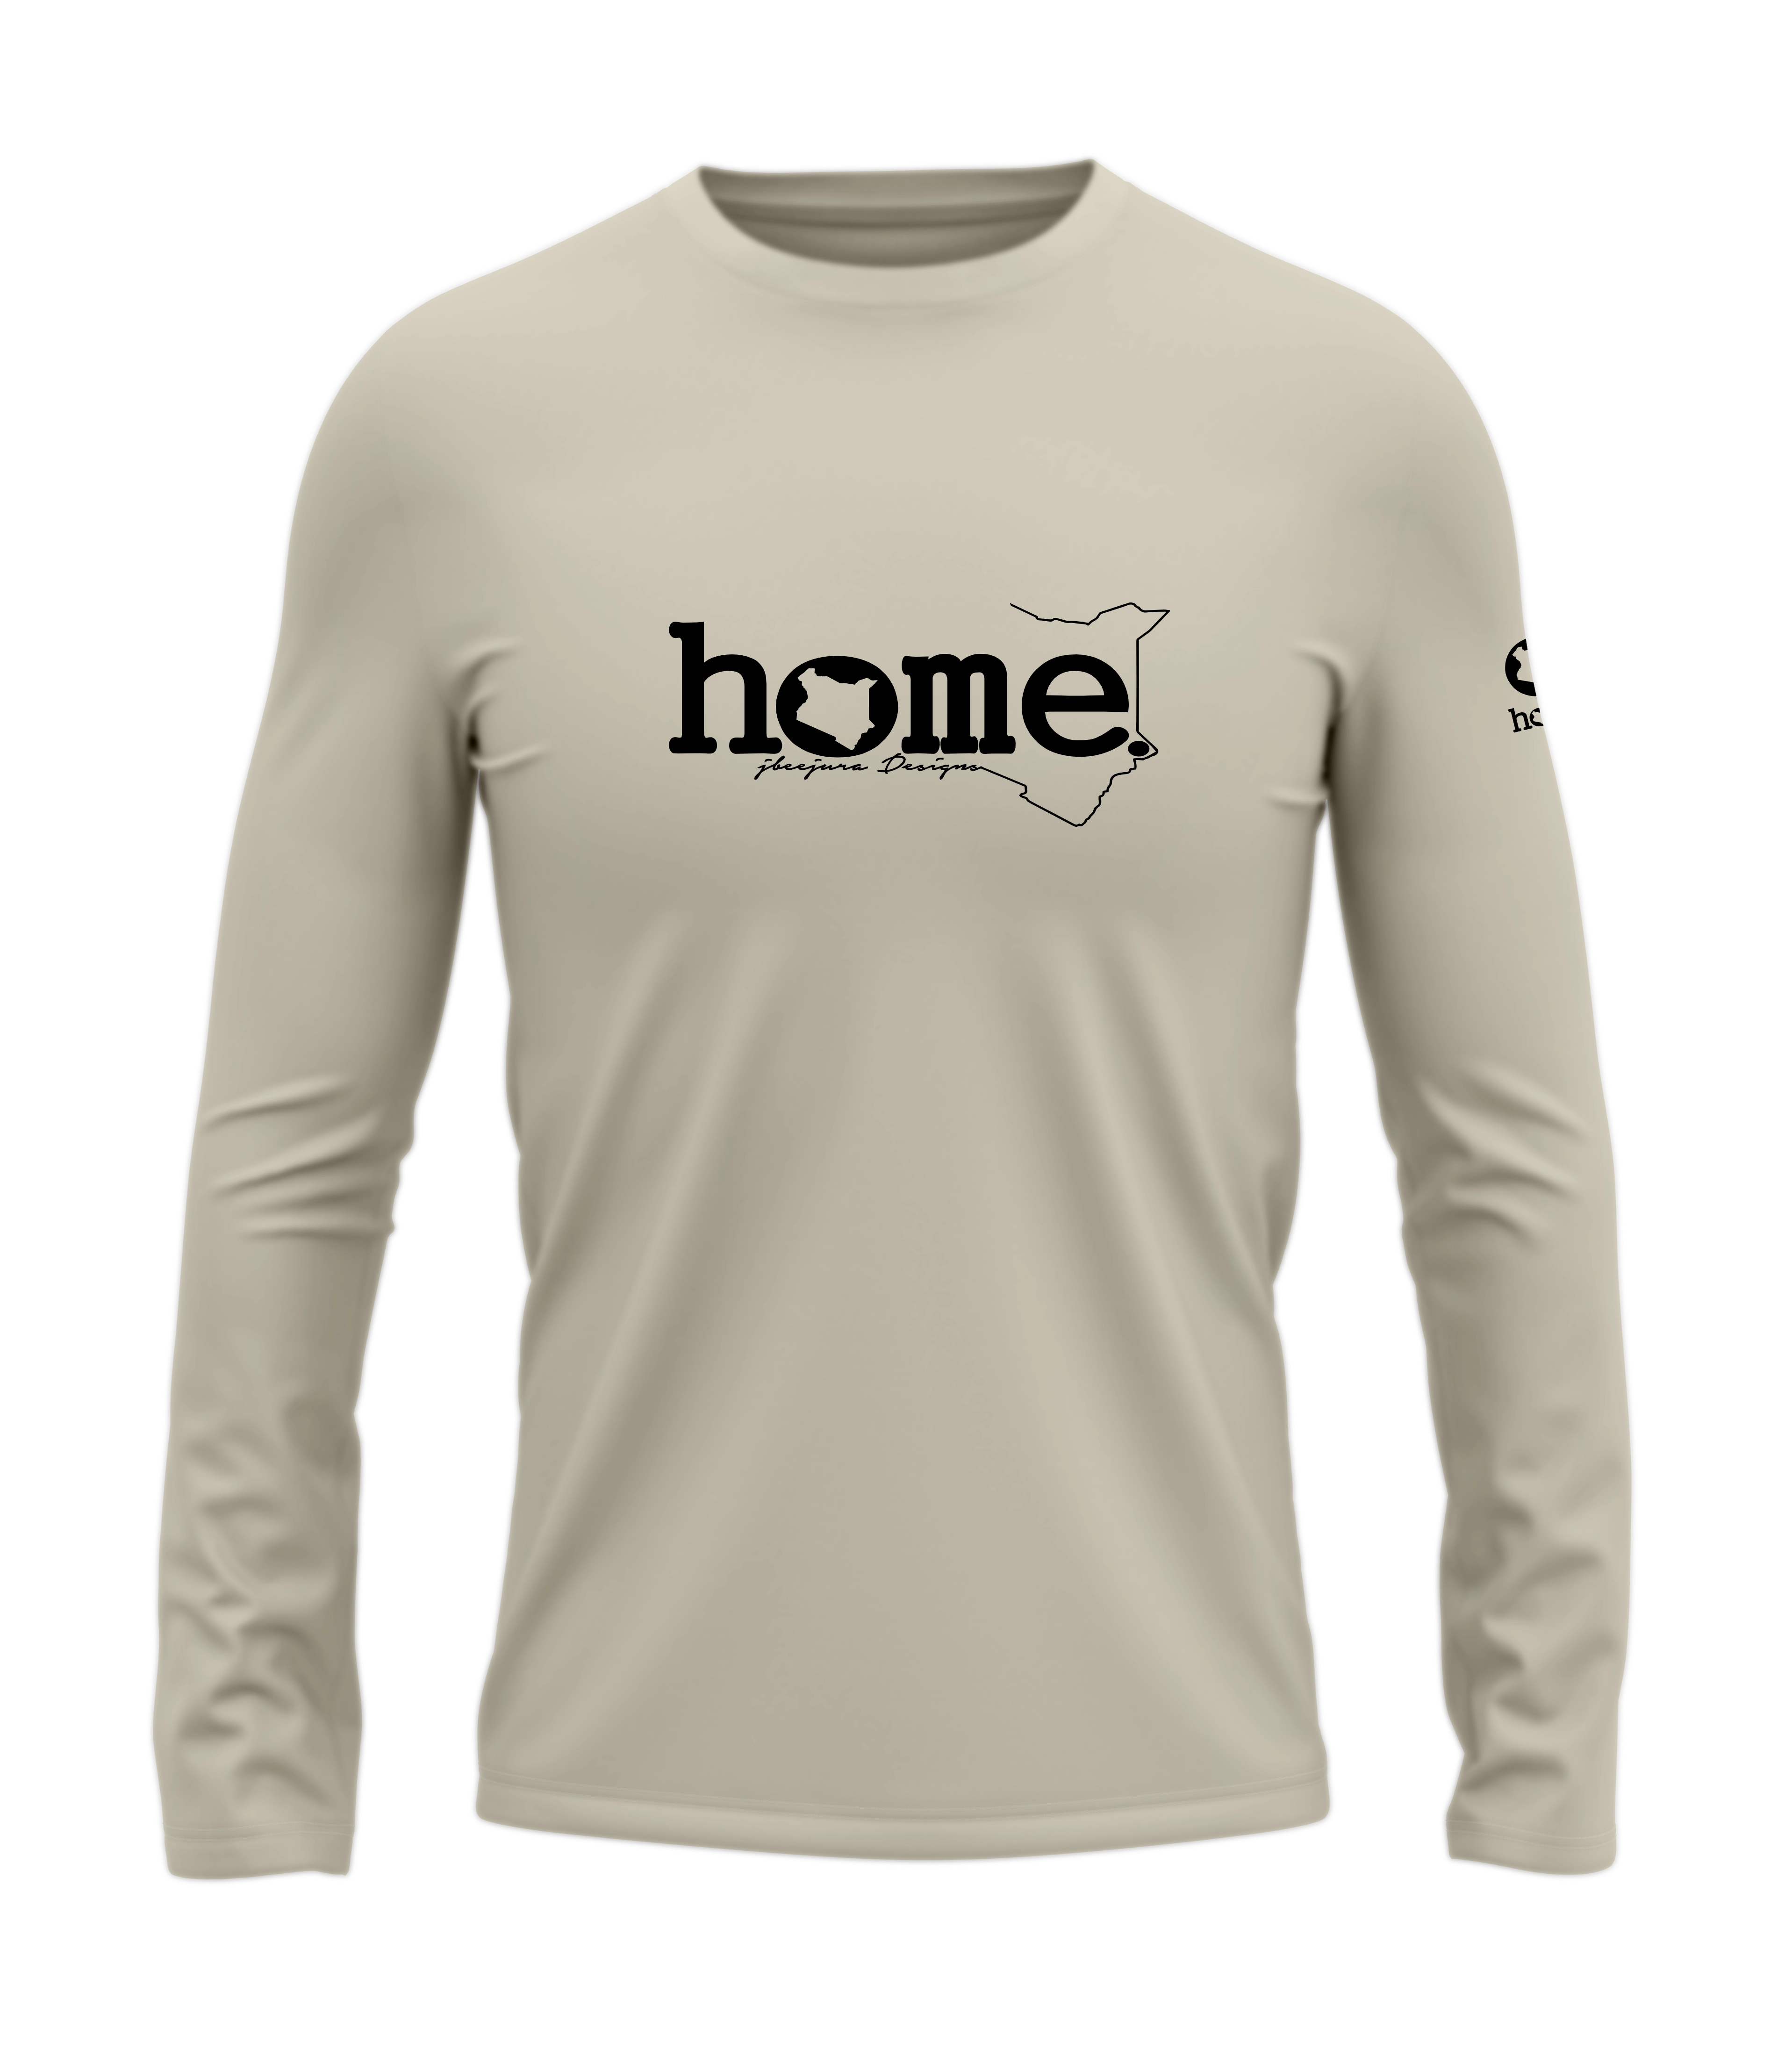 home_254 LONG-SLEEVED NUDE T-SHIRT WITH A BLACK CLASSIC WORDS PRINT – COTTON PLUS FABRIC